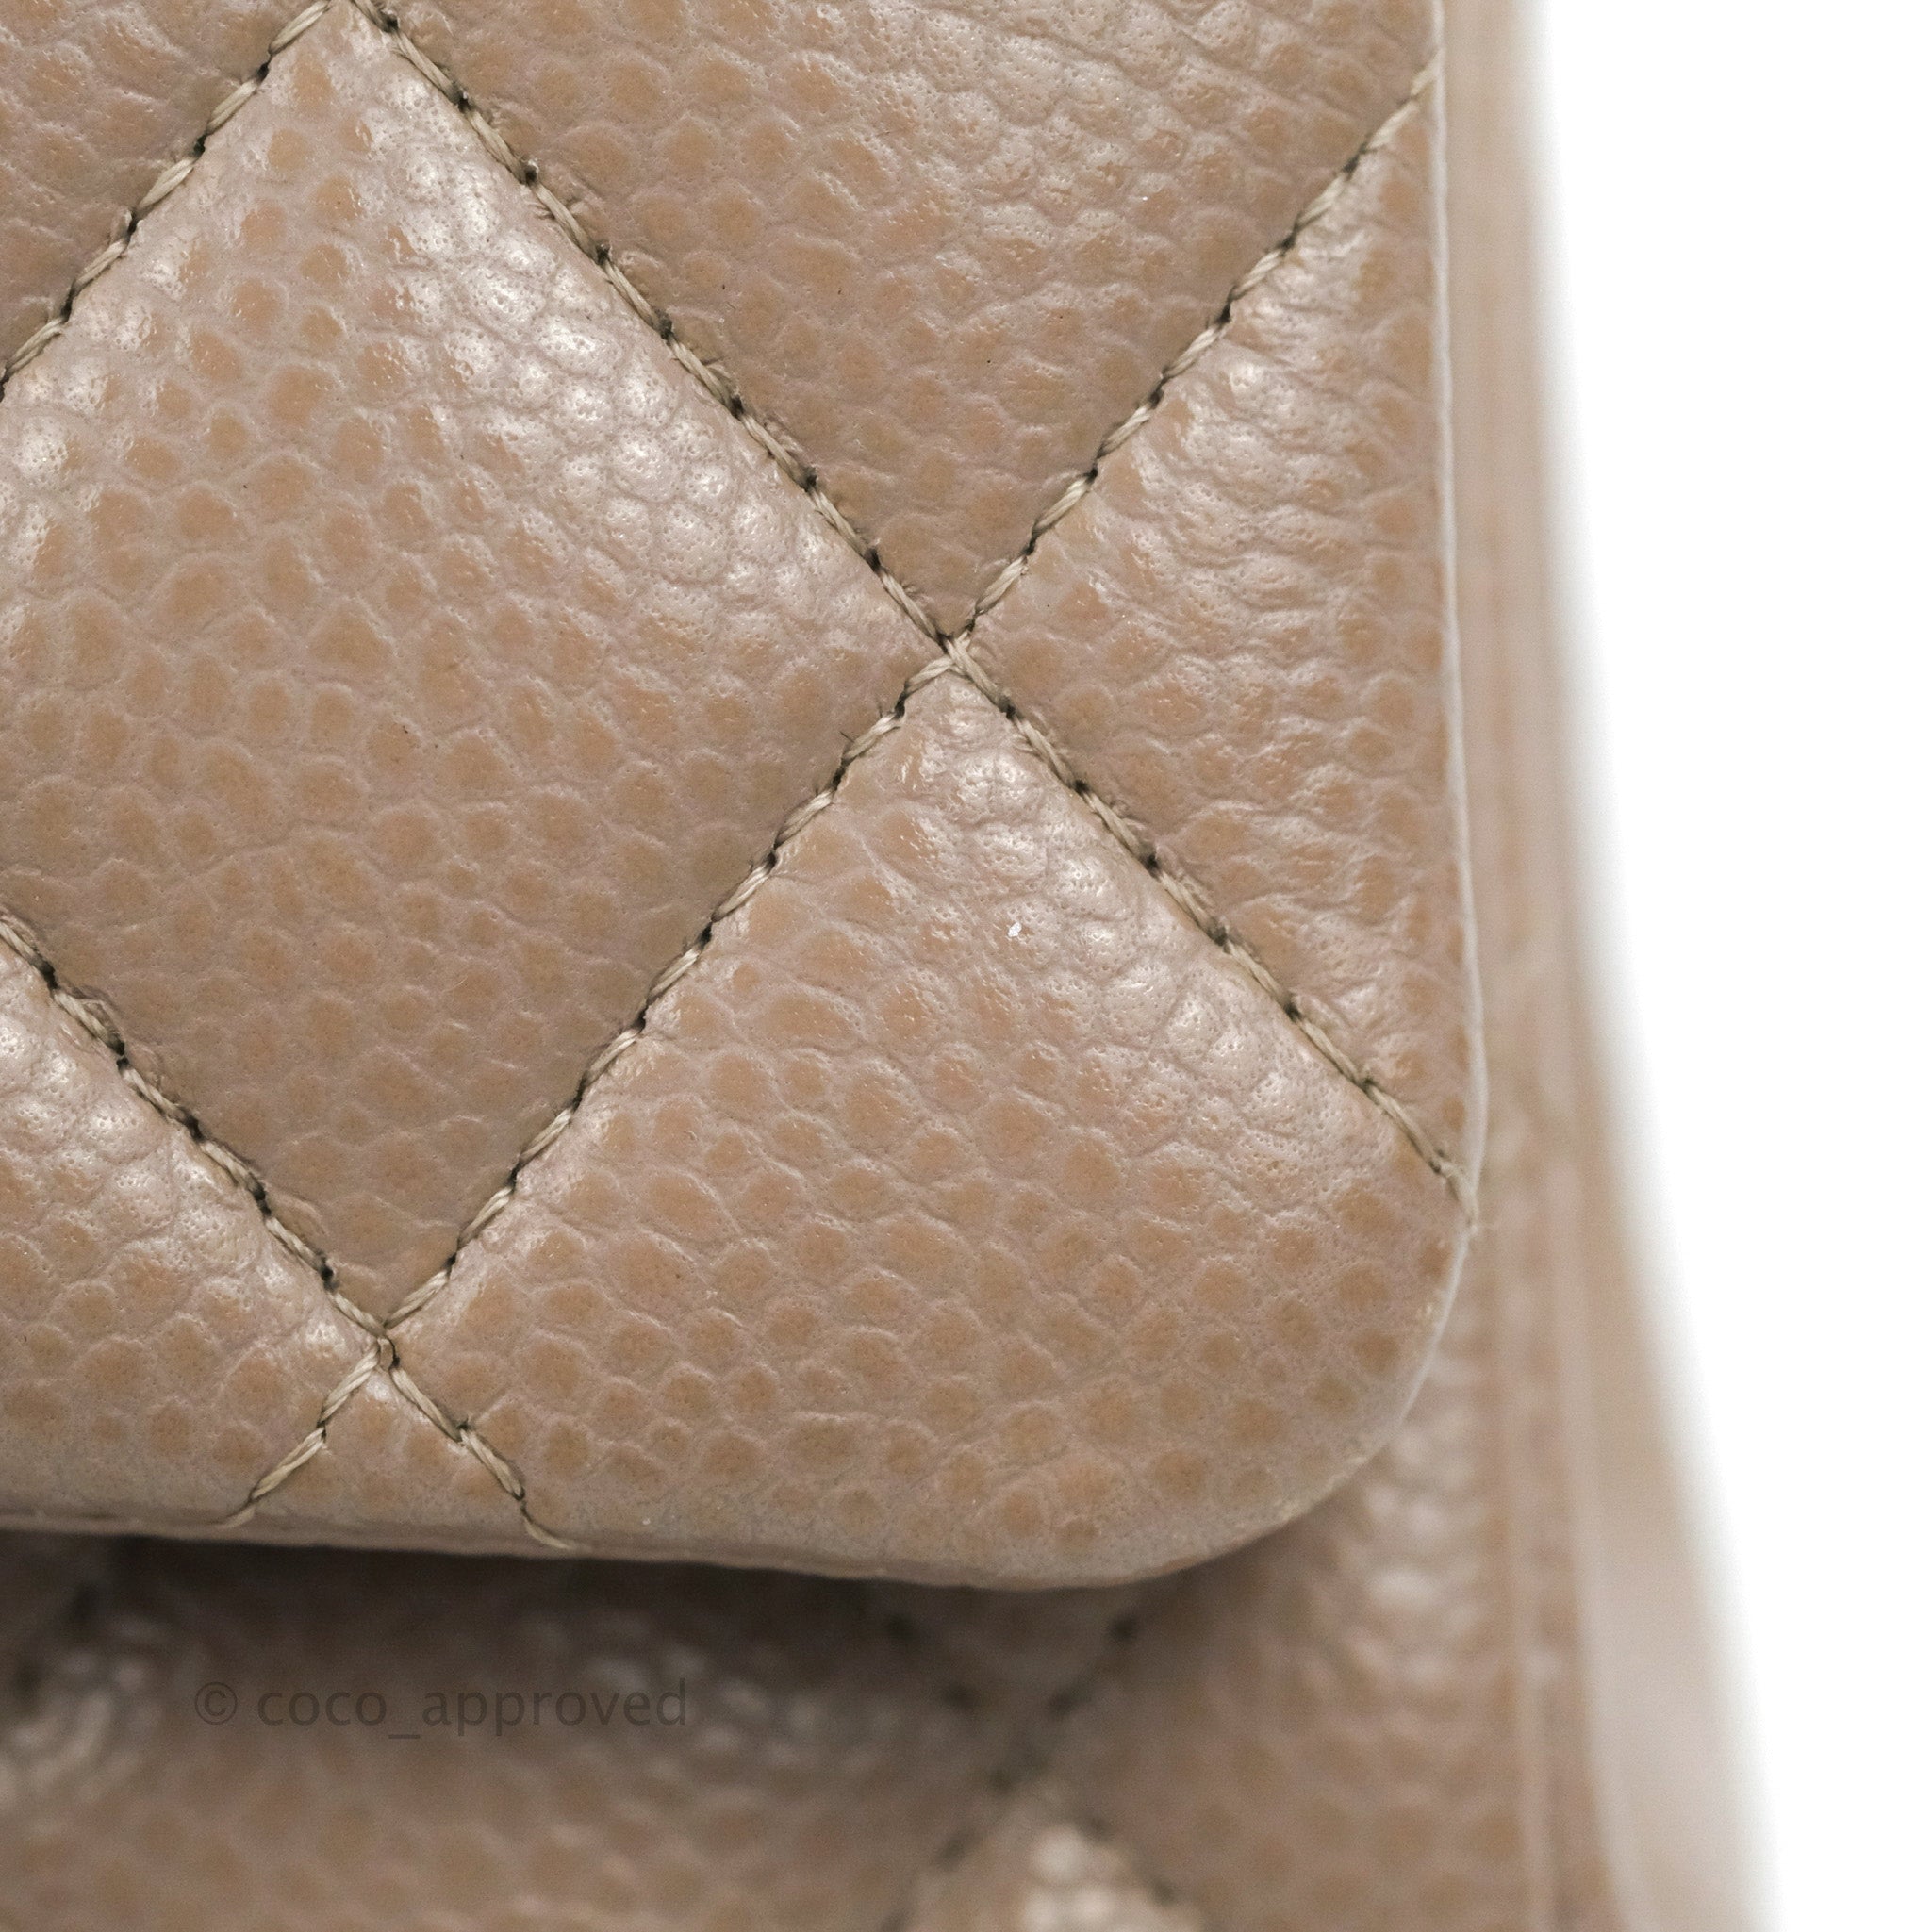 Chanel Classic M/L Medium Flap Quilted Taupe Grey Caviar Silver Hardwa –  Coco Approved Studio